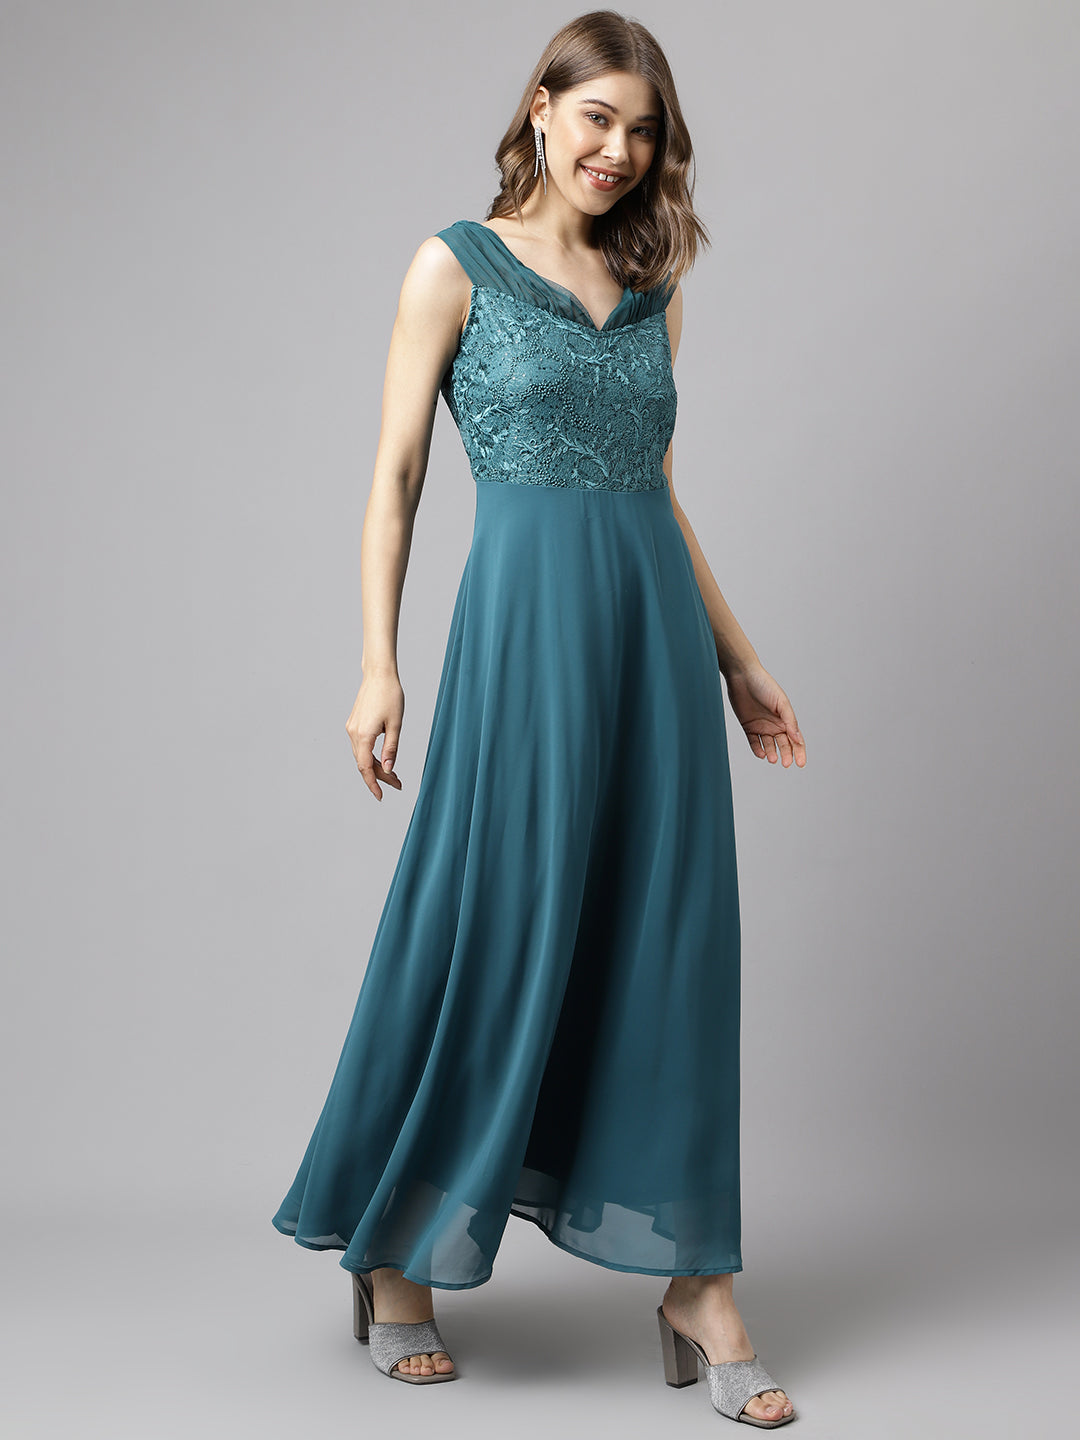 Teal Sleeveless Solid Sequin Dress